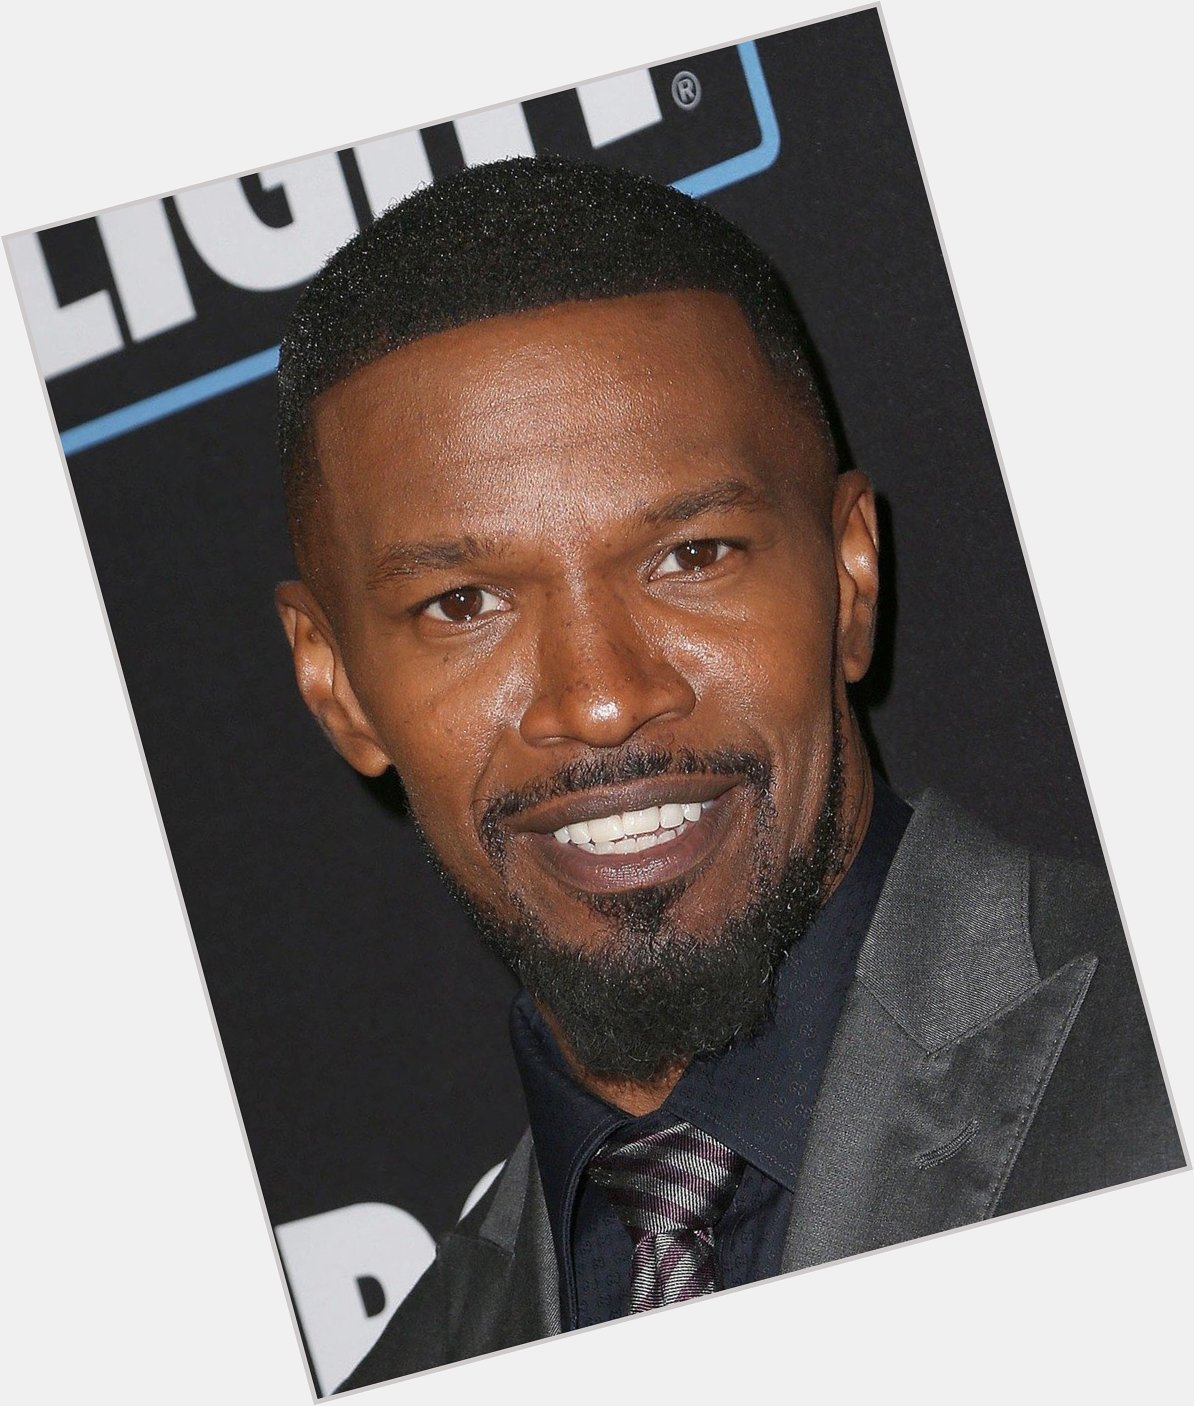 Wishing Jamie Foxx a Happy Birthday!One of the greatest singers and actors of all time!       